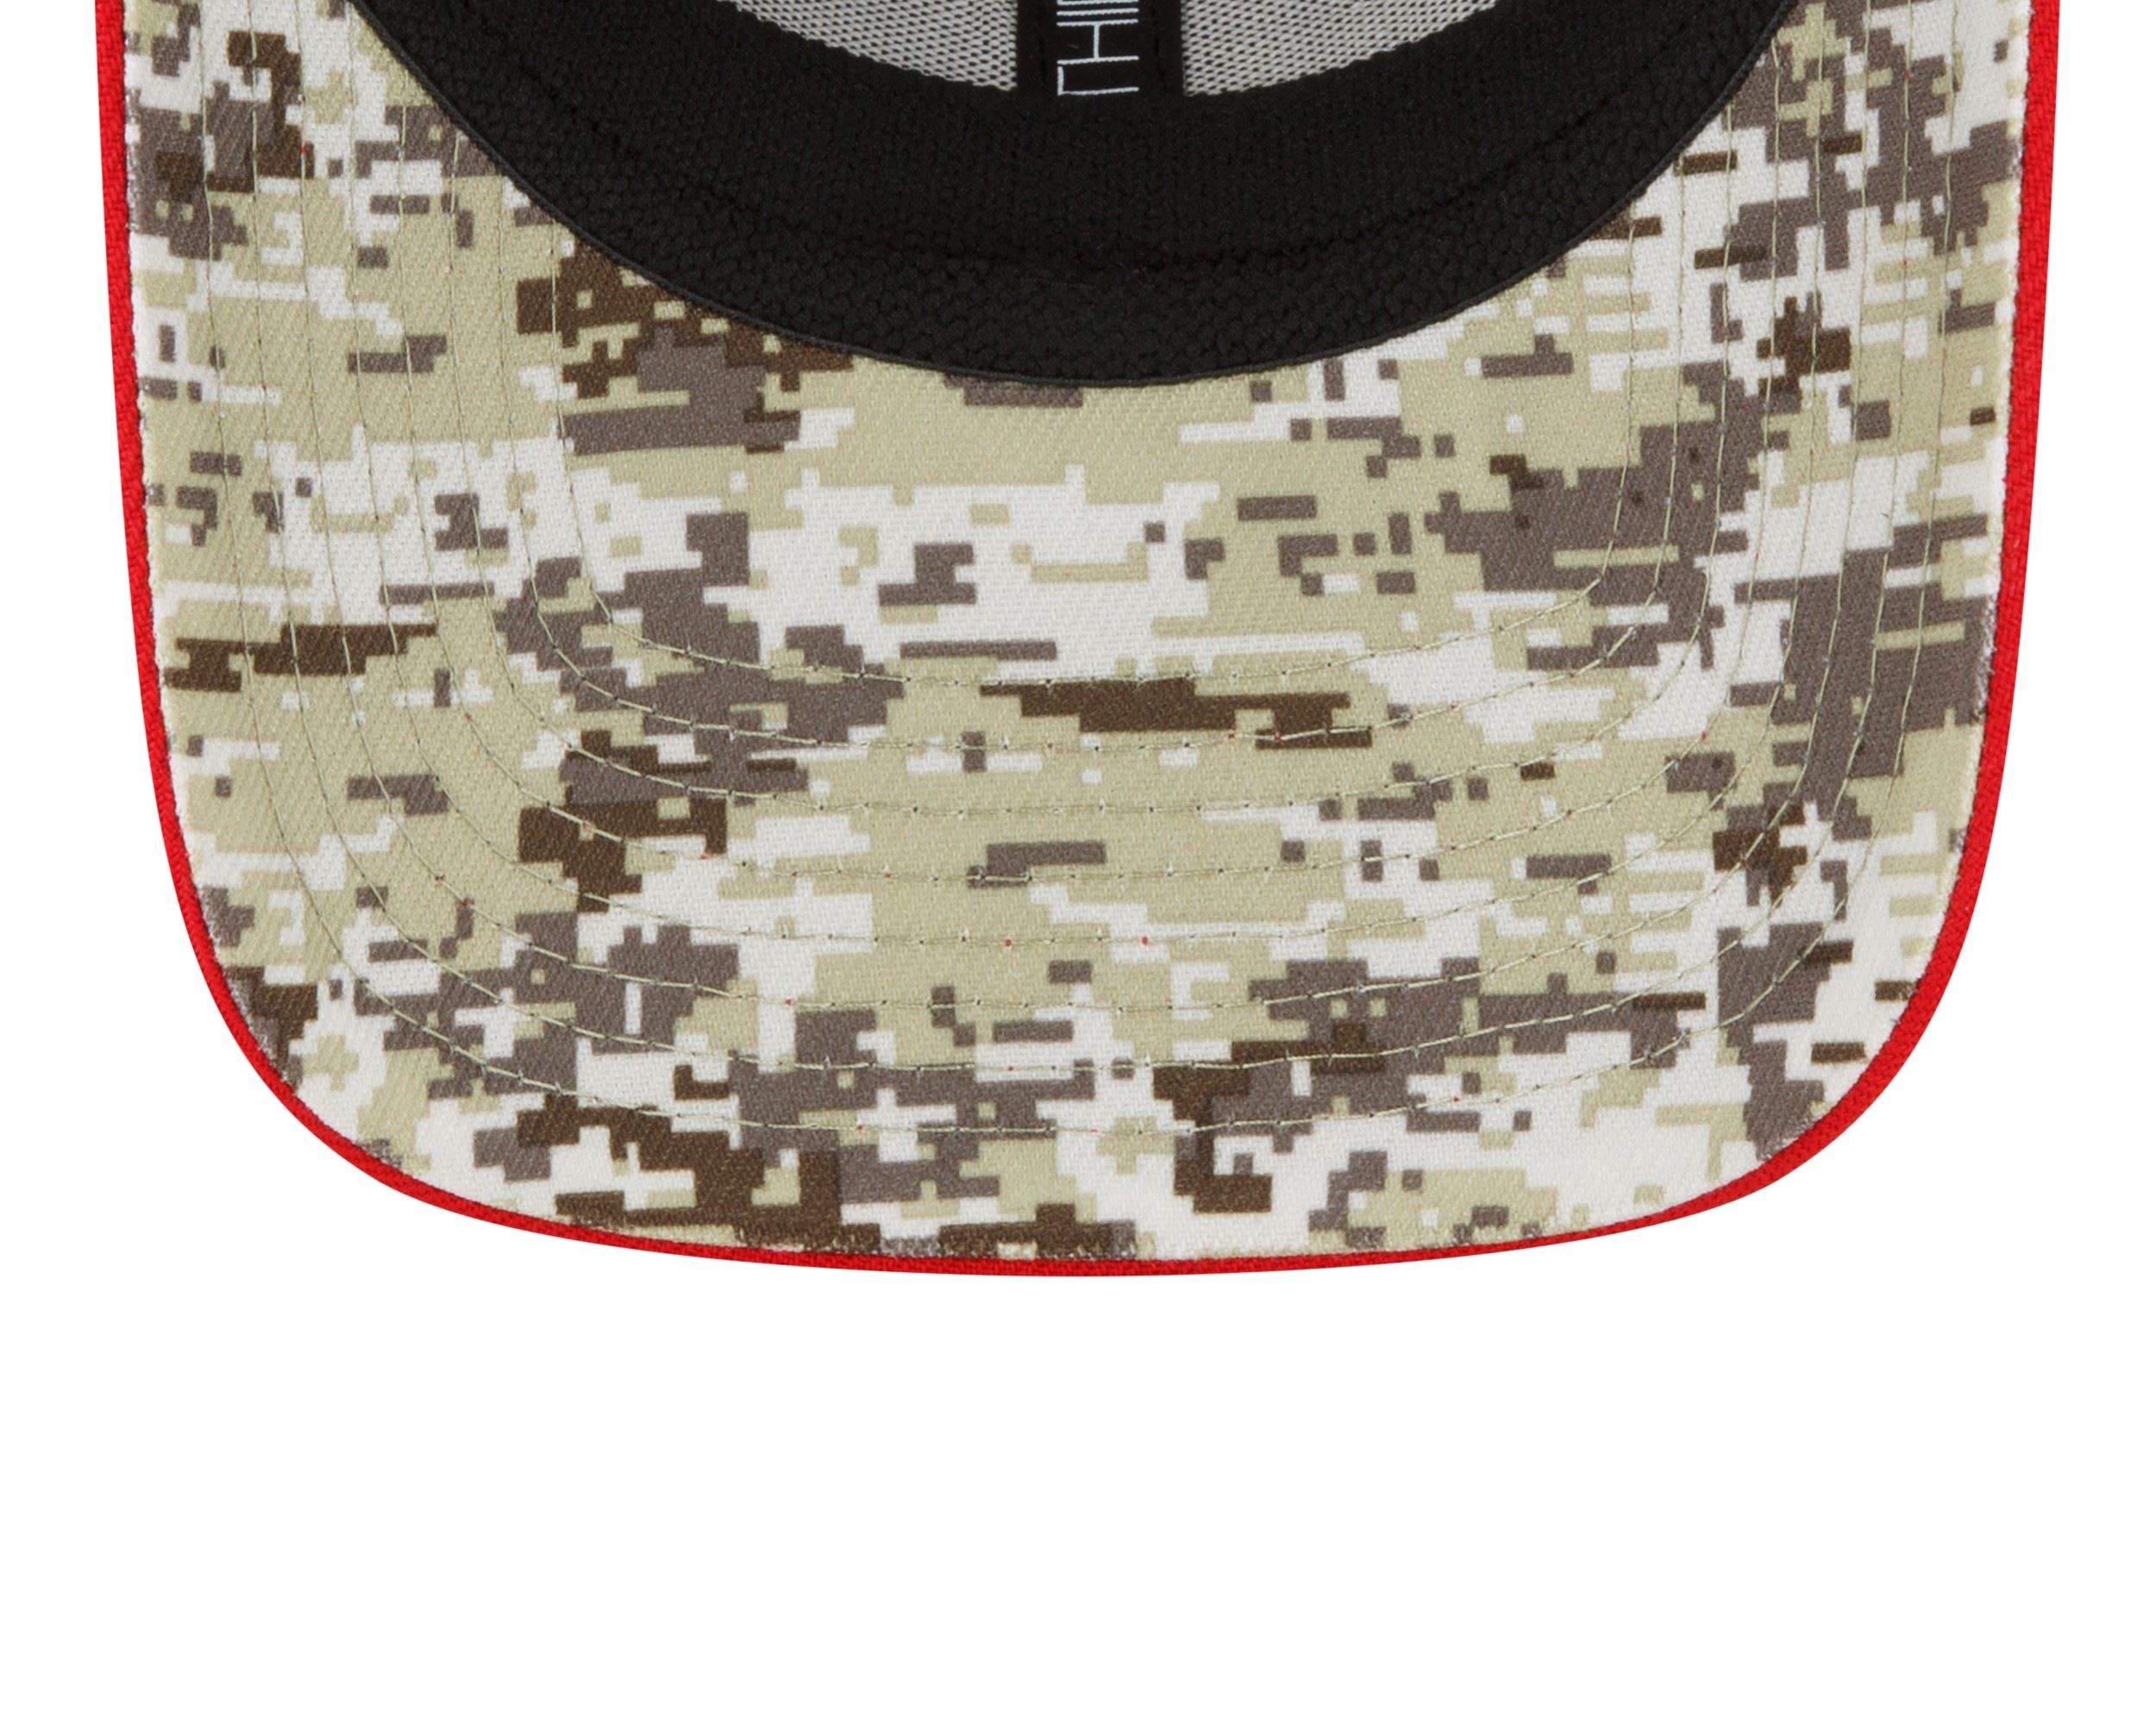 San Francisco 49ers NFL Salute to Service 2022 Black Red 39Thirty Stretch Cap New Era